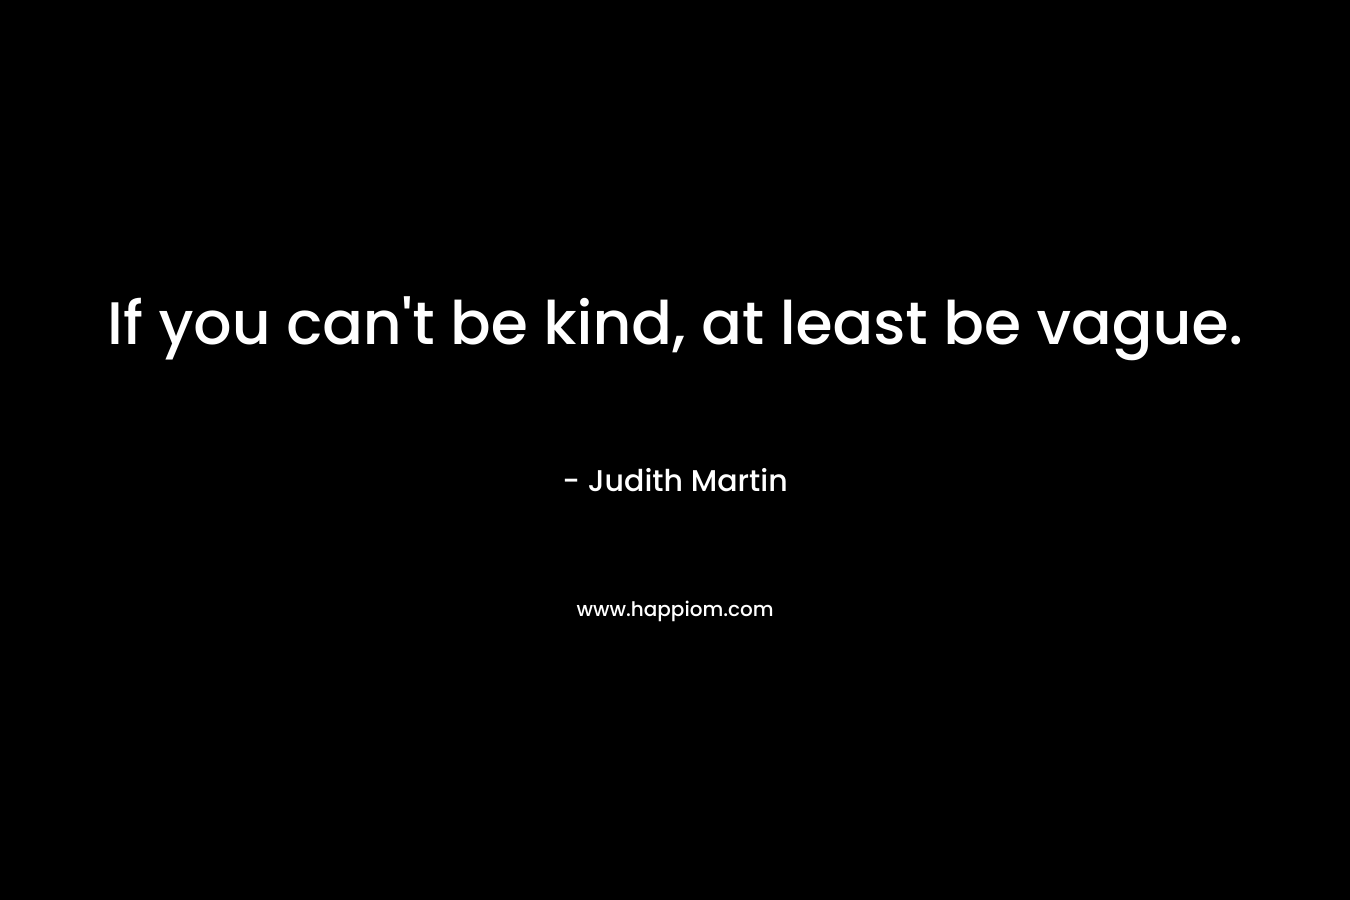 If you can’t be kind, at least be vague. – Judith Martin